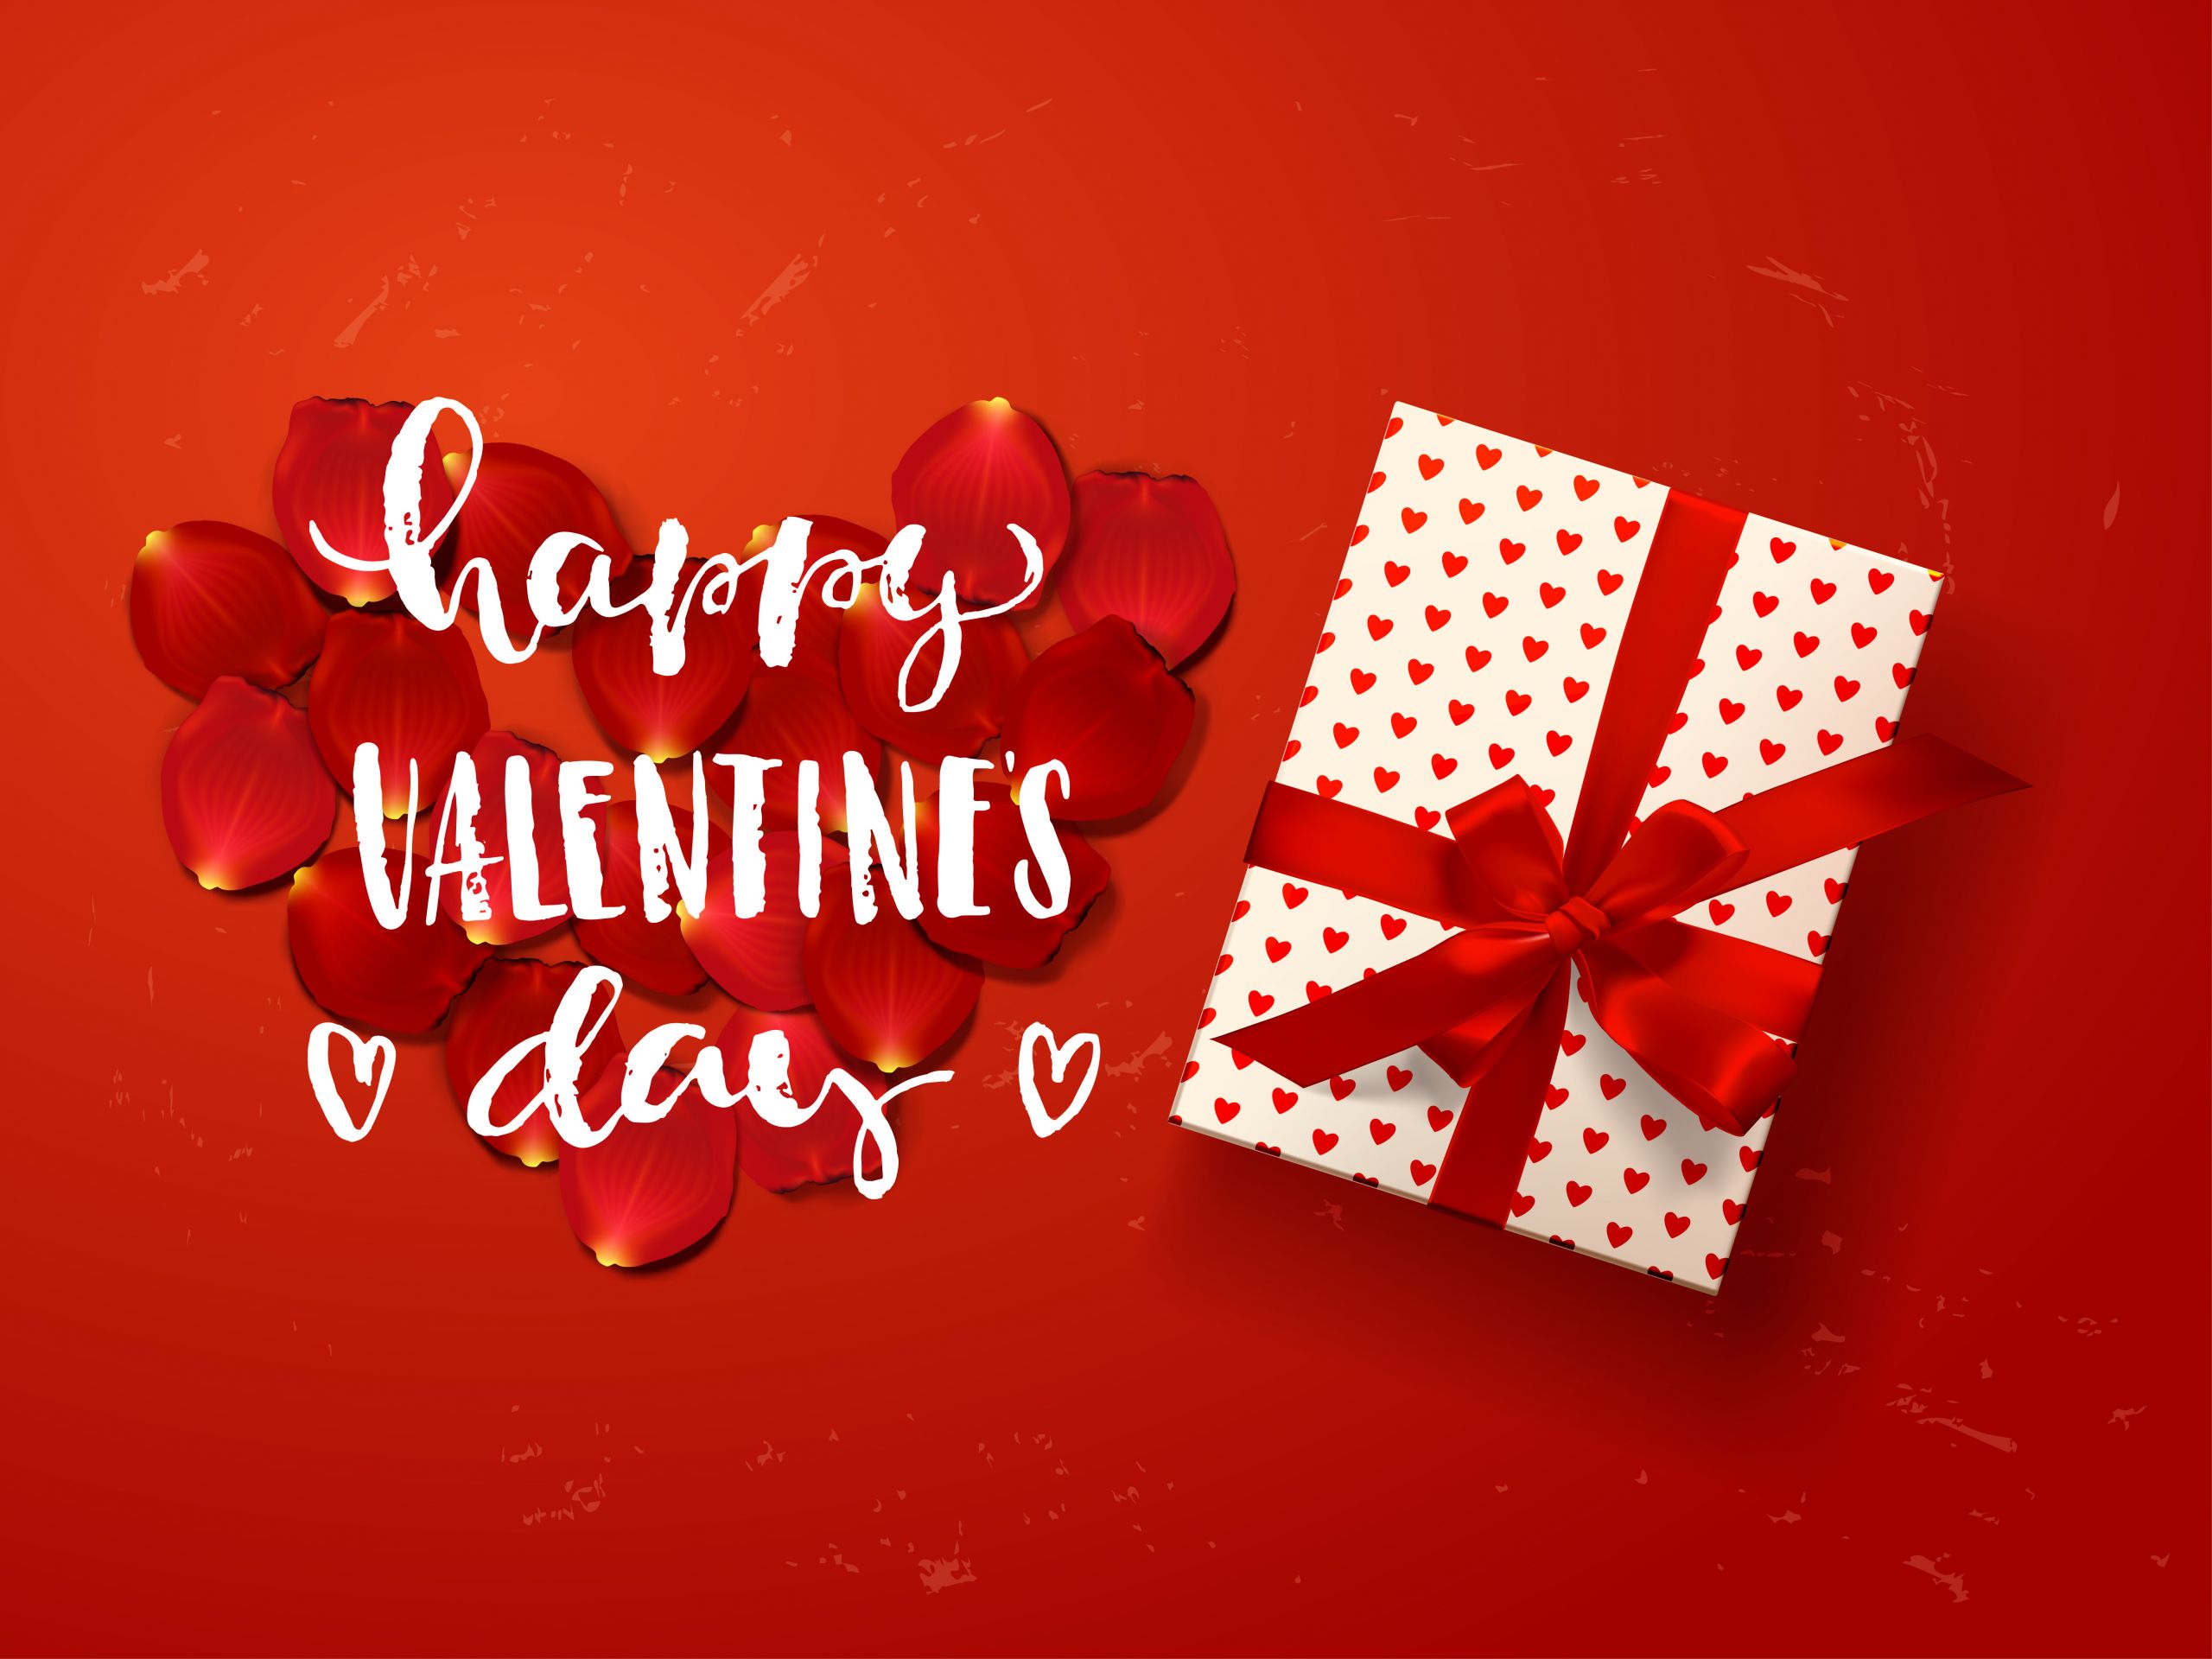 Valentines Day Date Ideas 2019
 Valentine’s Day Gifts A Special Guide of Latest Gifts for